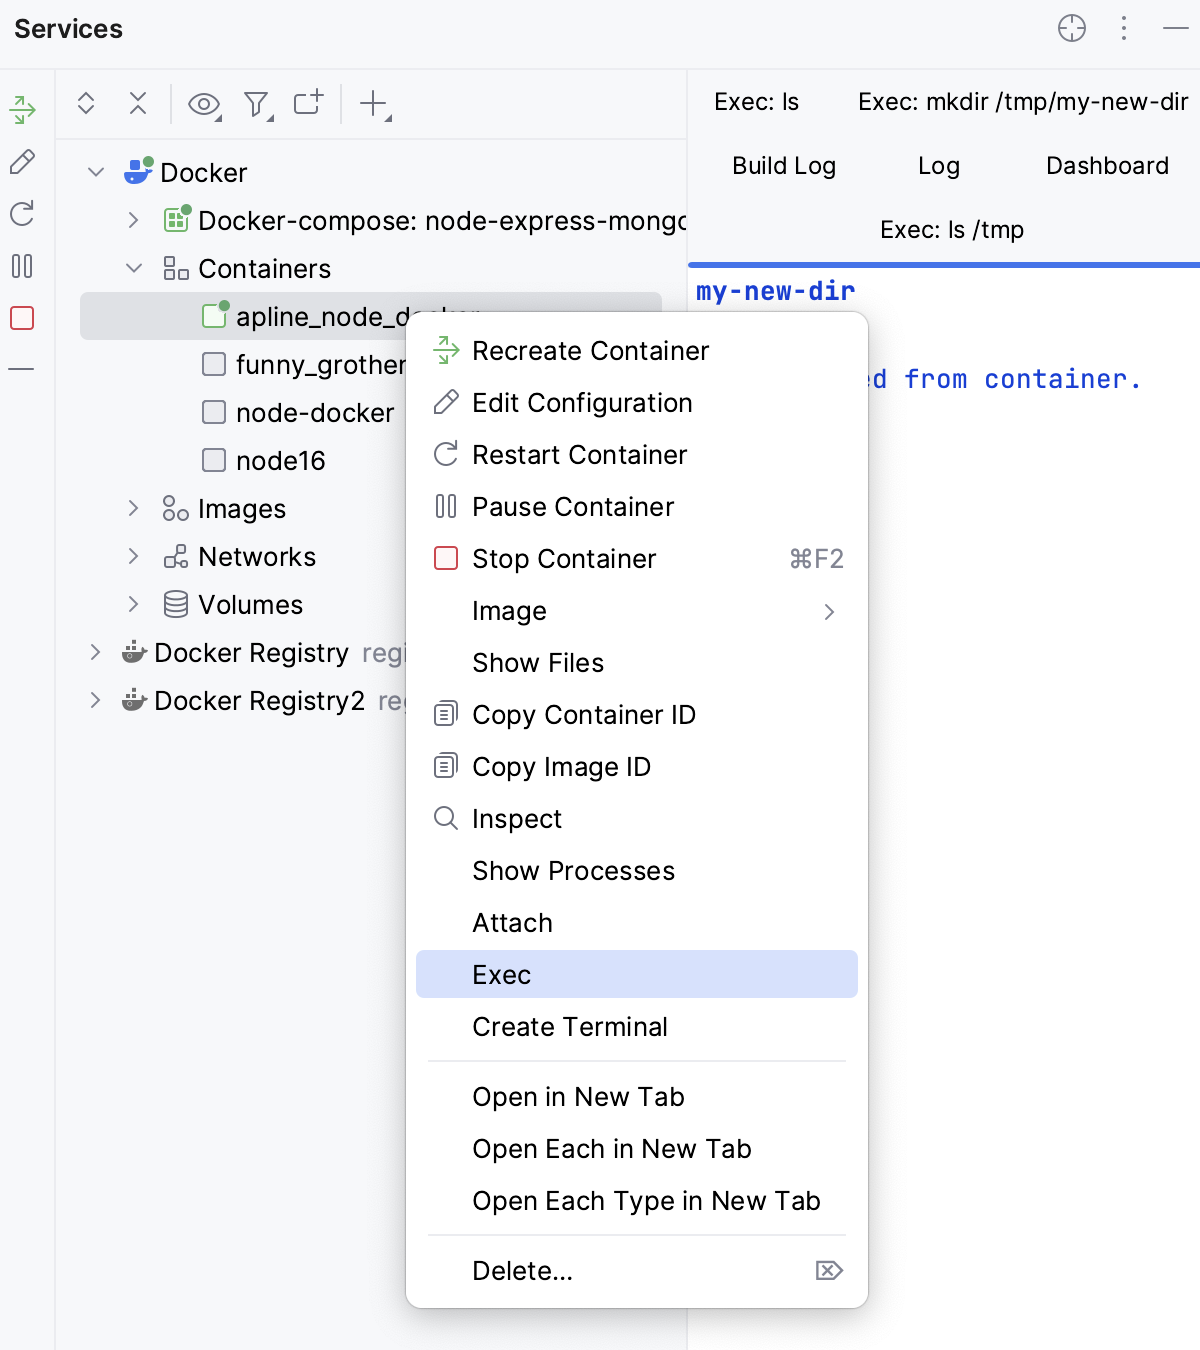 Execute command in a running container: select Exec from the context menu